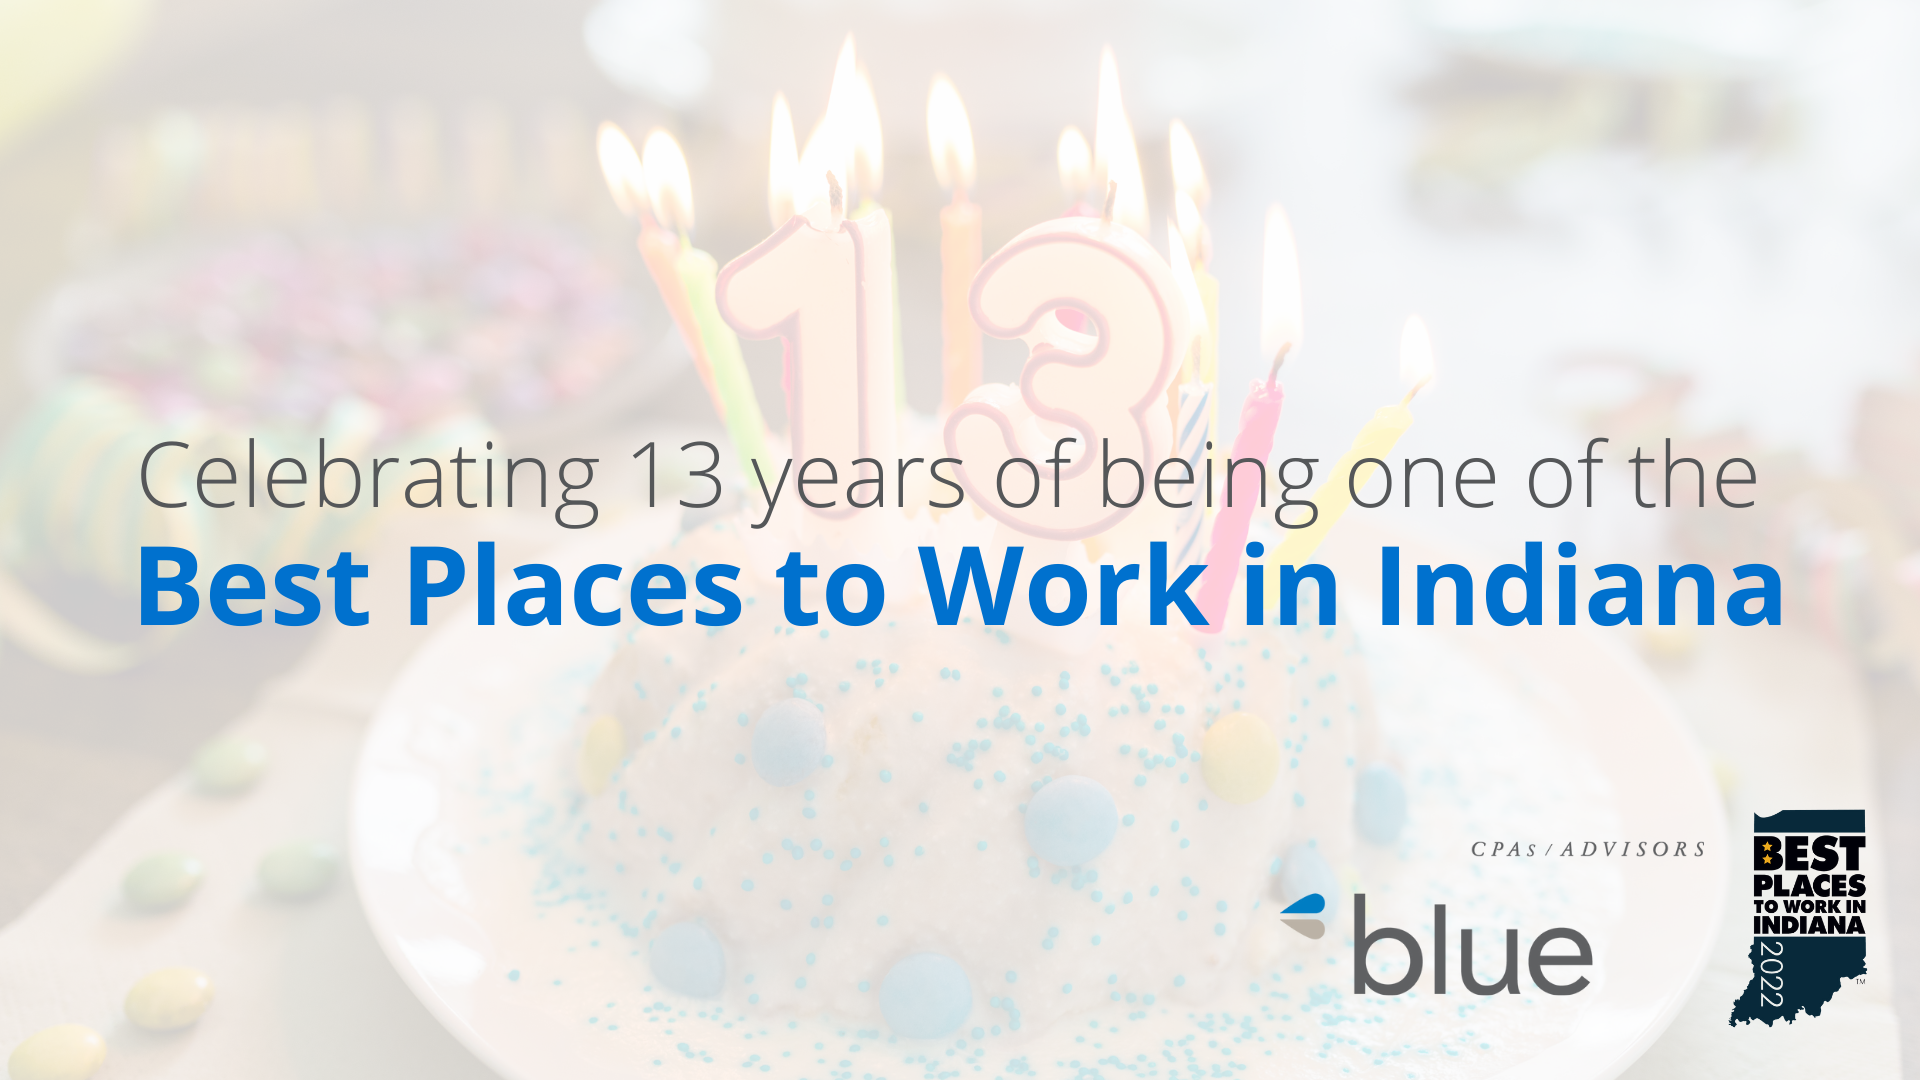 Blue & Co., LLC Named One of Indiana’s Best Places to Work for 13th Year | Best Places to Work | Celebrating 13 Years as a Best Place to Work